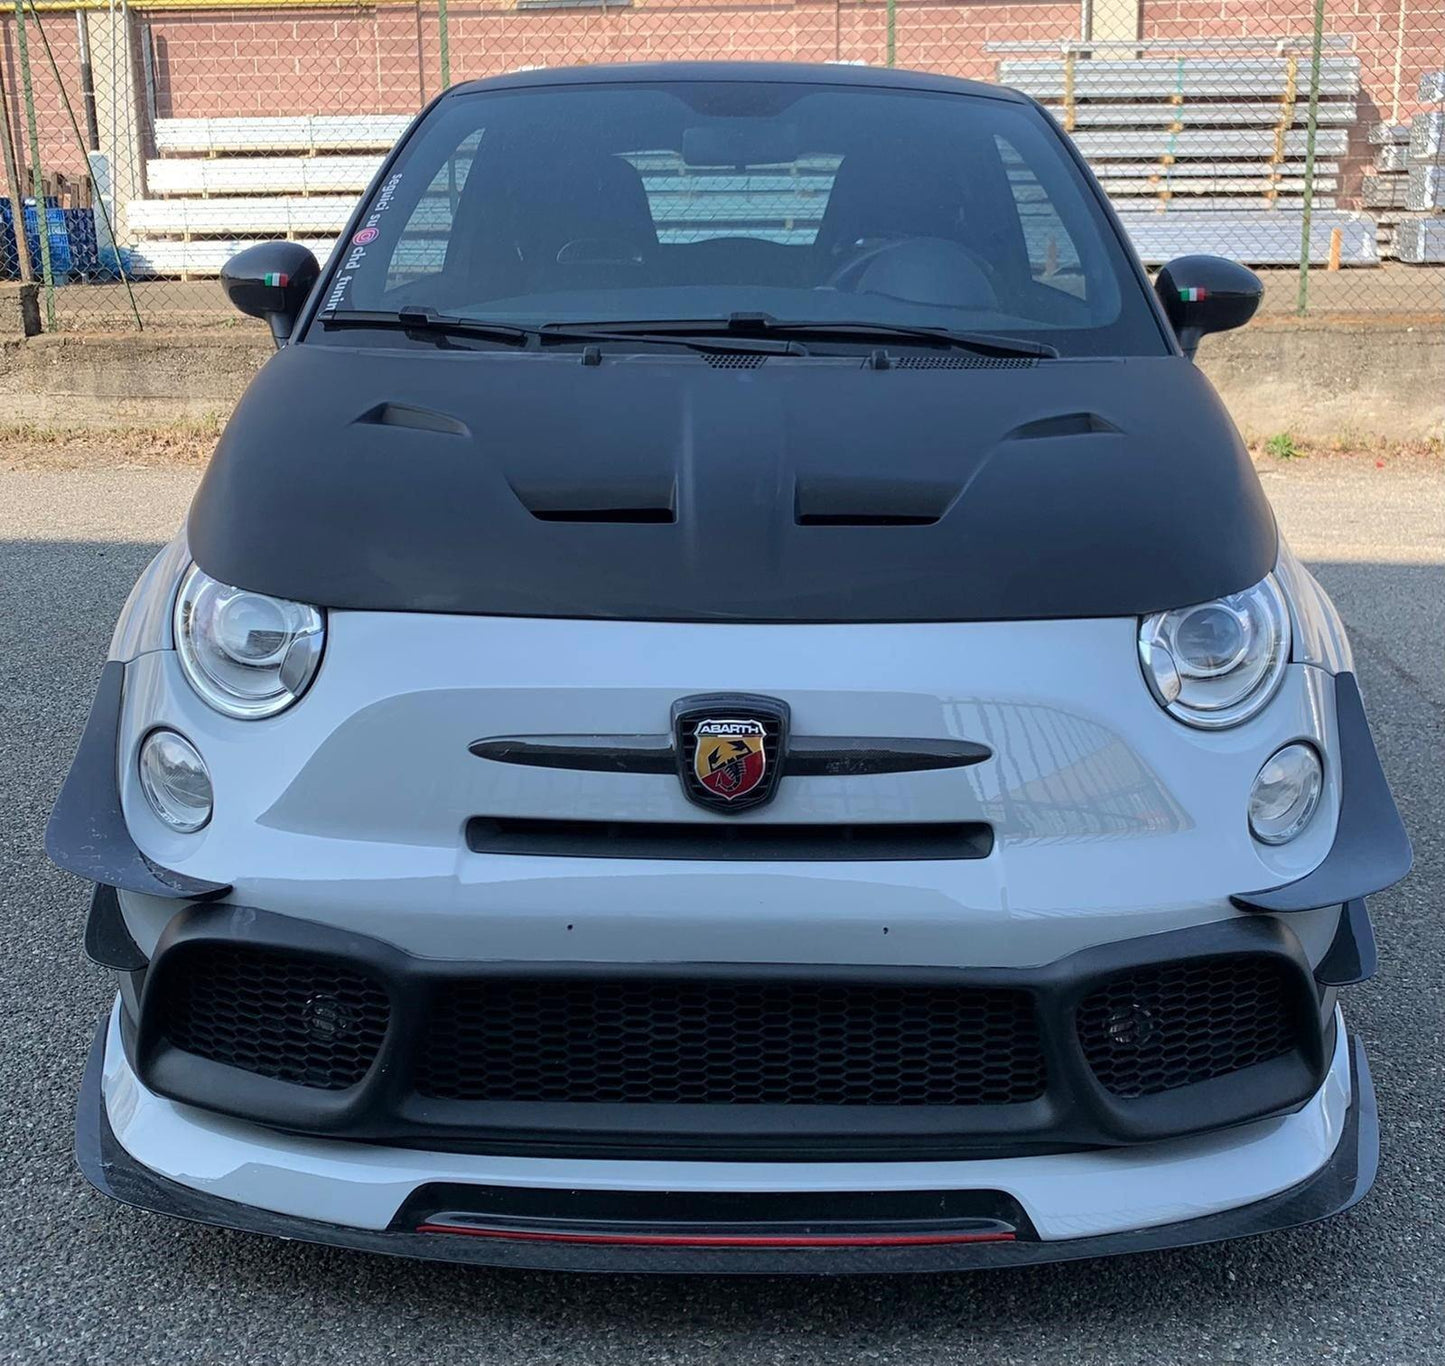 CHD Tuning x Pista Performance ˜Cattivo" Angry Vented Bonnet/Hood for Abarth 500/595/695 - Abarth Tuning